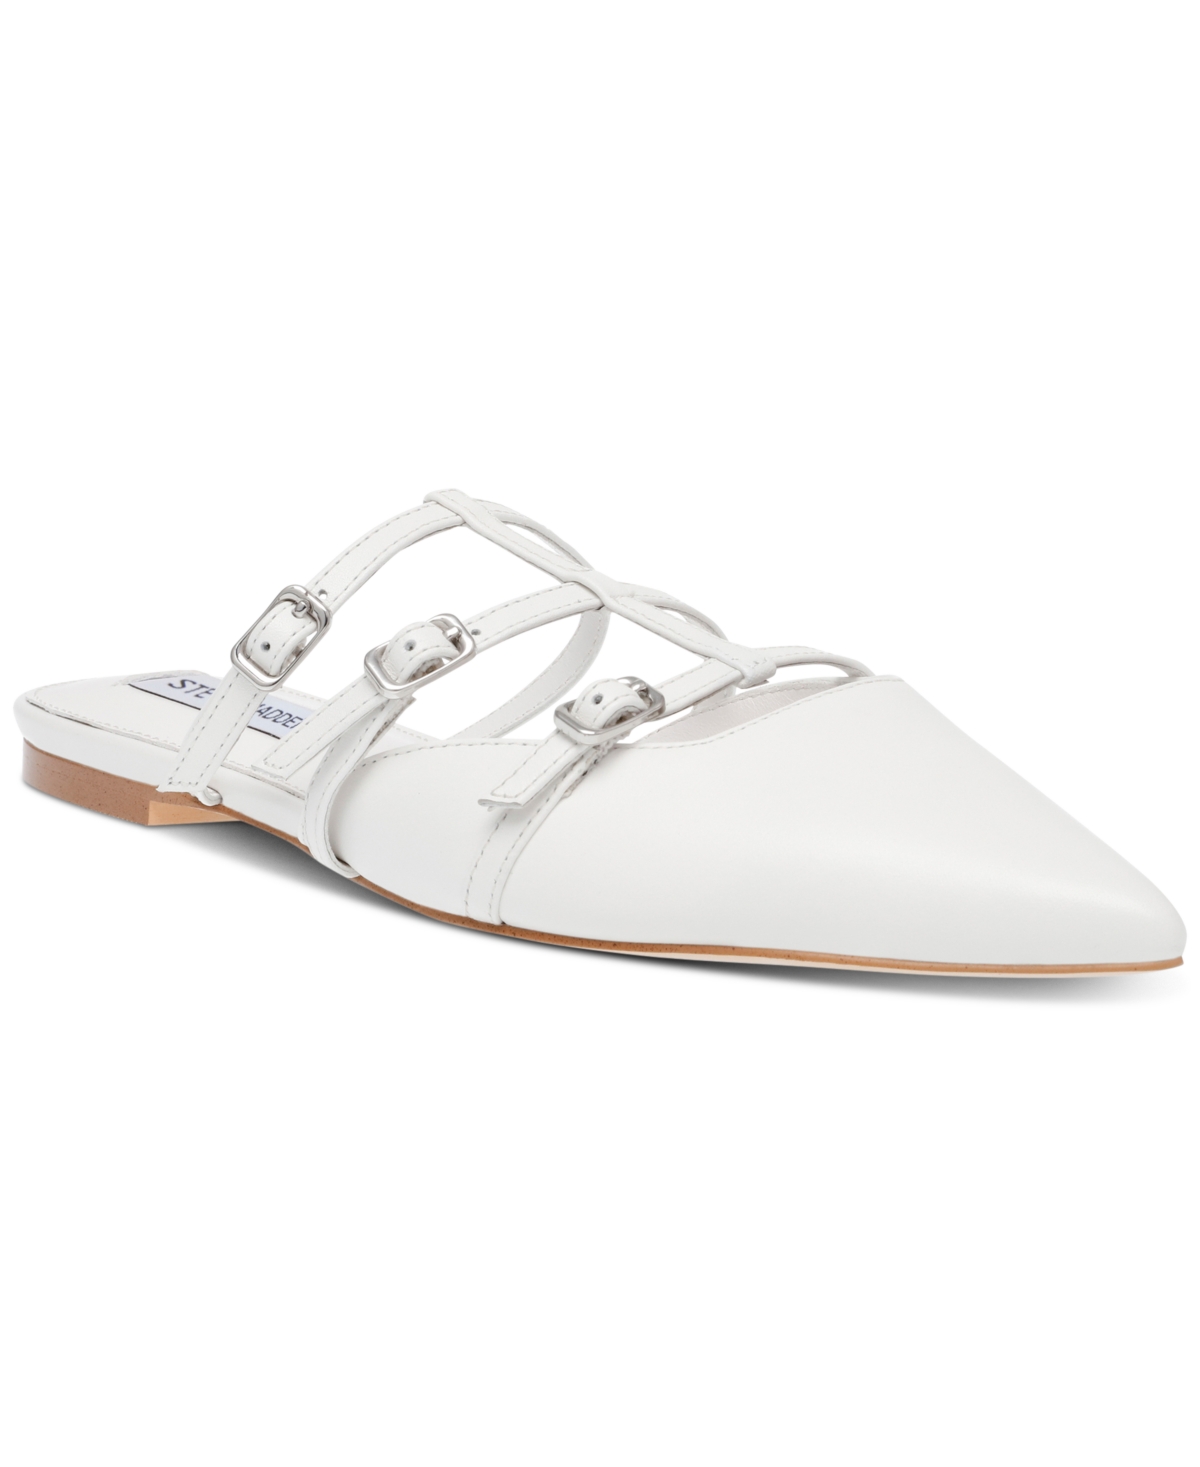 Women's Shatter Pointed-Toe Mule Flats - White Leather